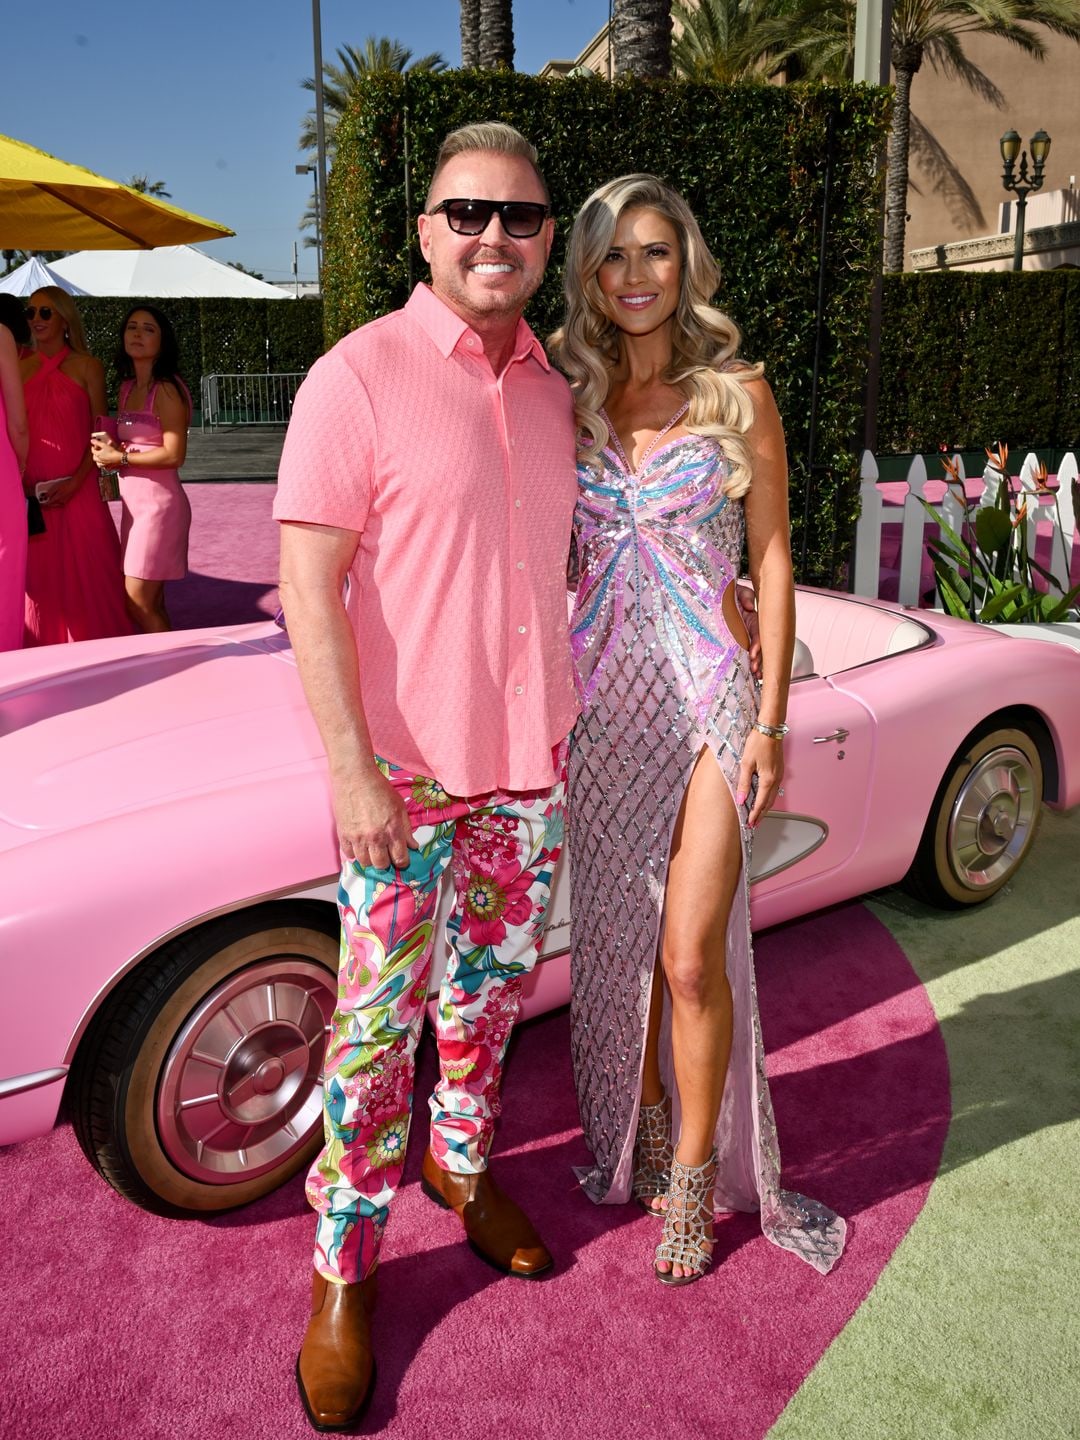 Christina and James smiling at the exclusive event, a pink Barbie car behind them